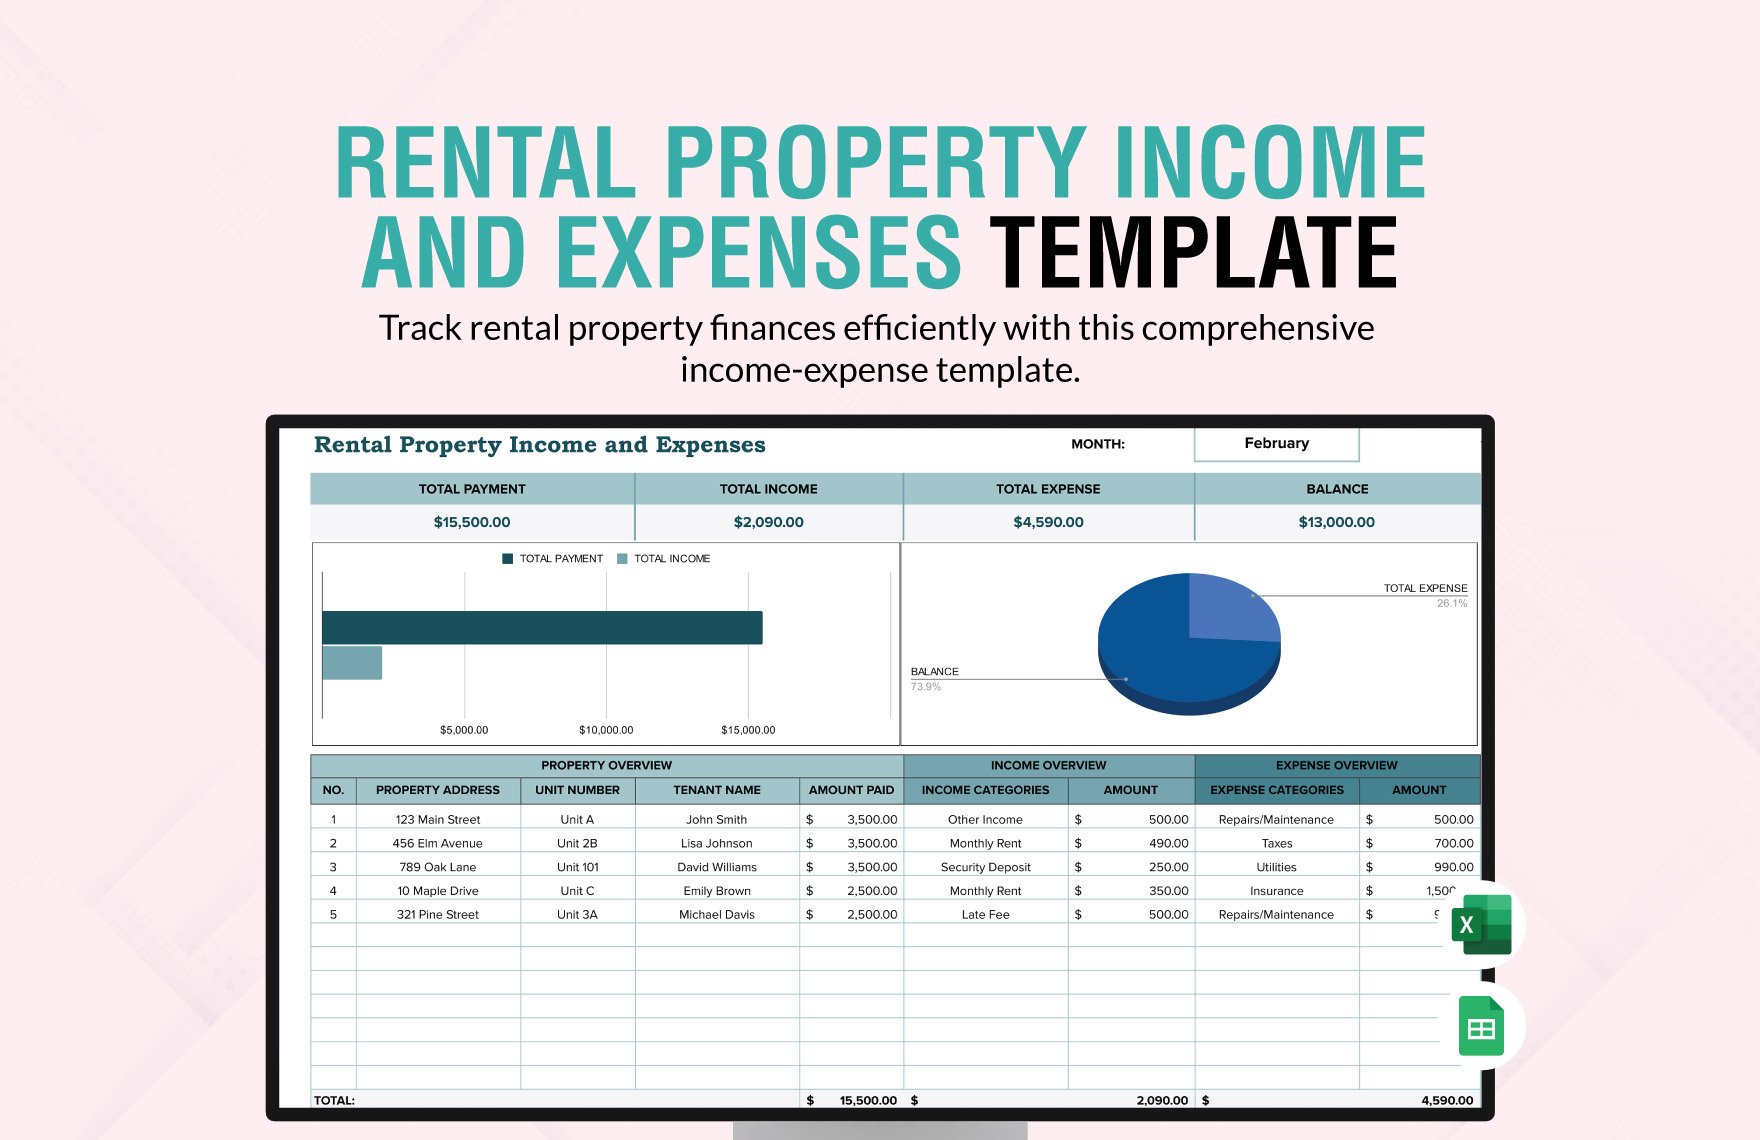 Rental Property Income and Expenses template in Excel, Google Sheets